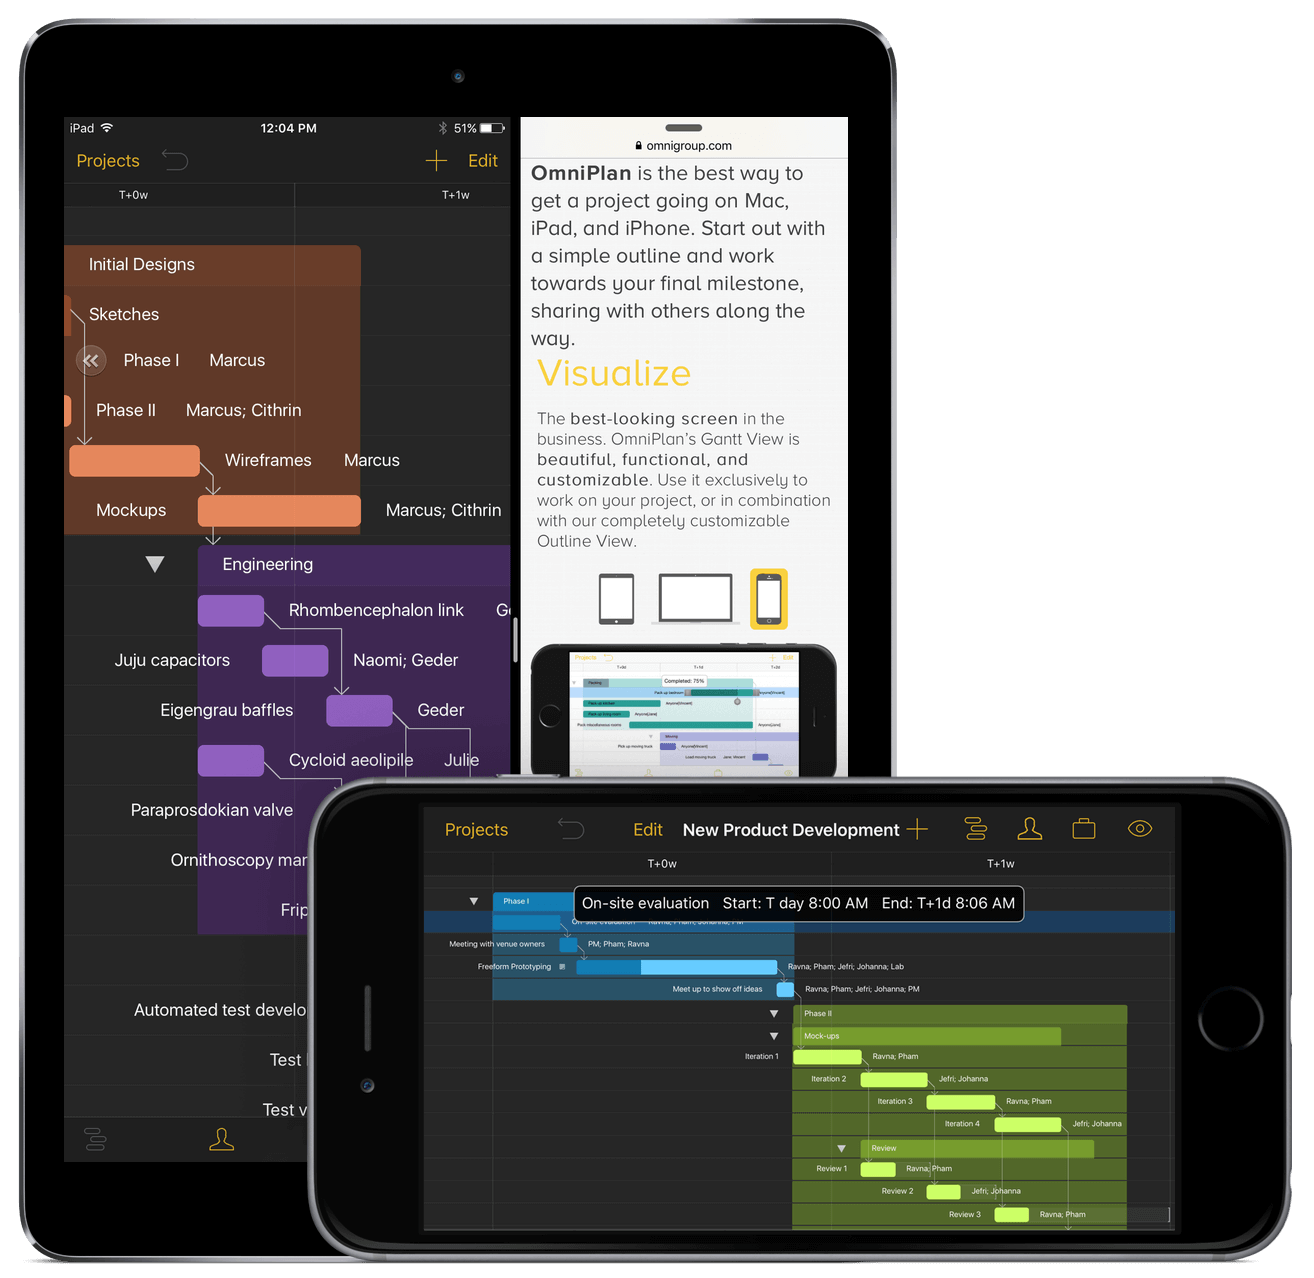 OmniPlan 2.2 for iOS as seen on iPad Air 2 and iPhone 6 Plus.